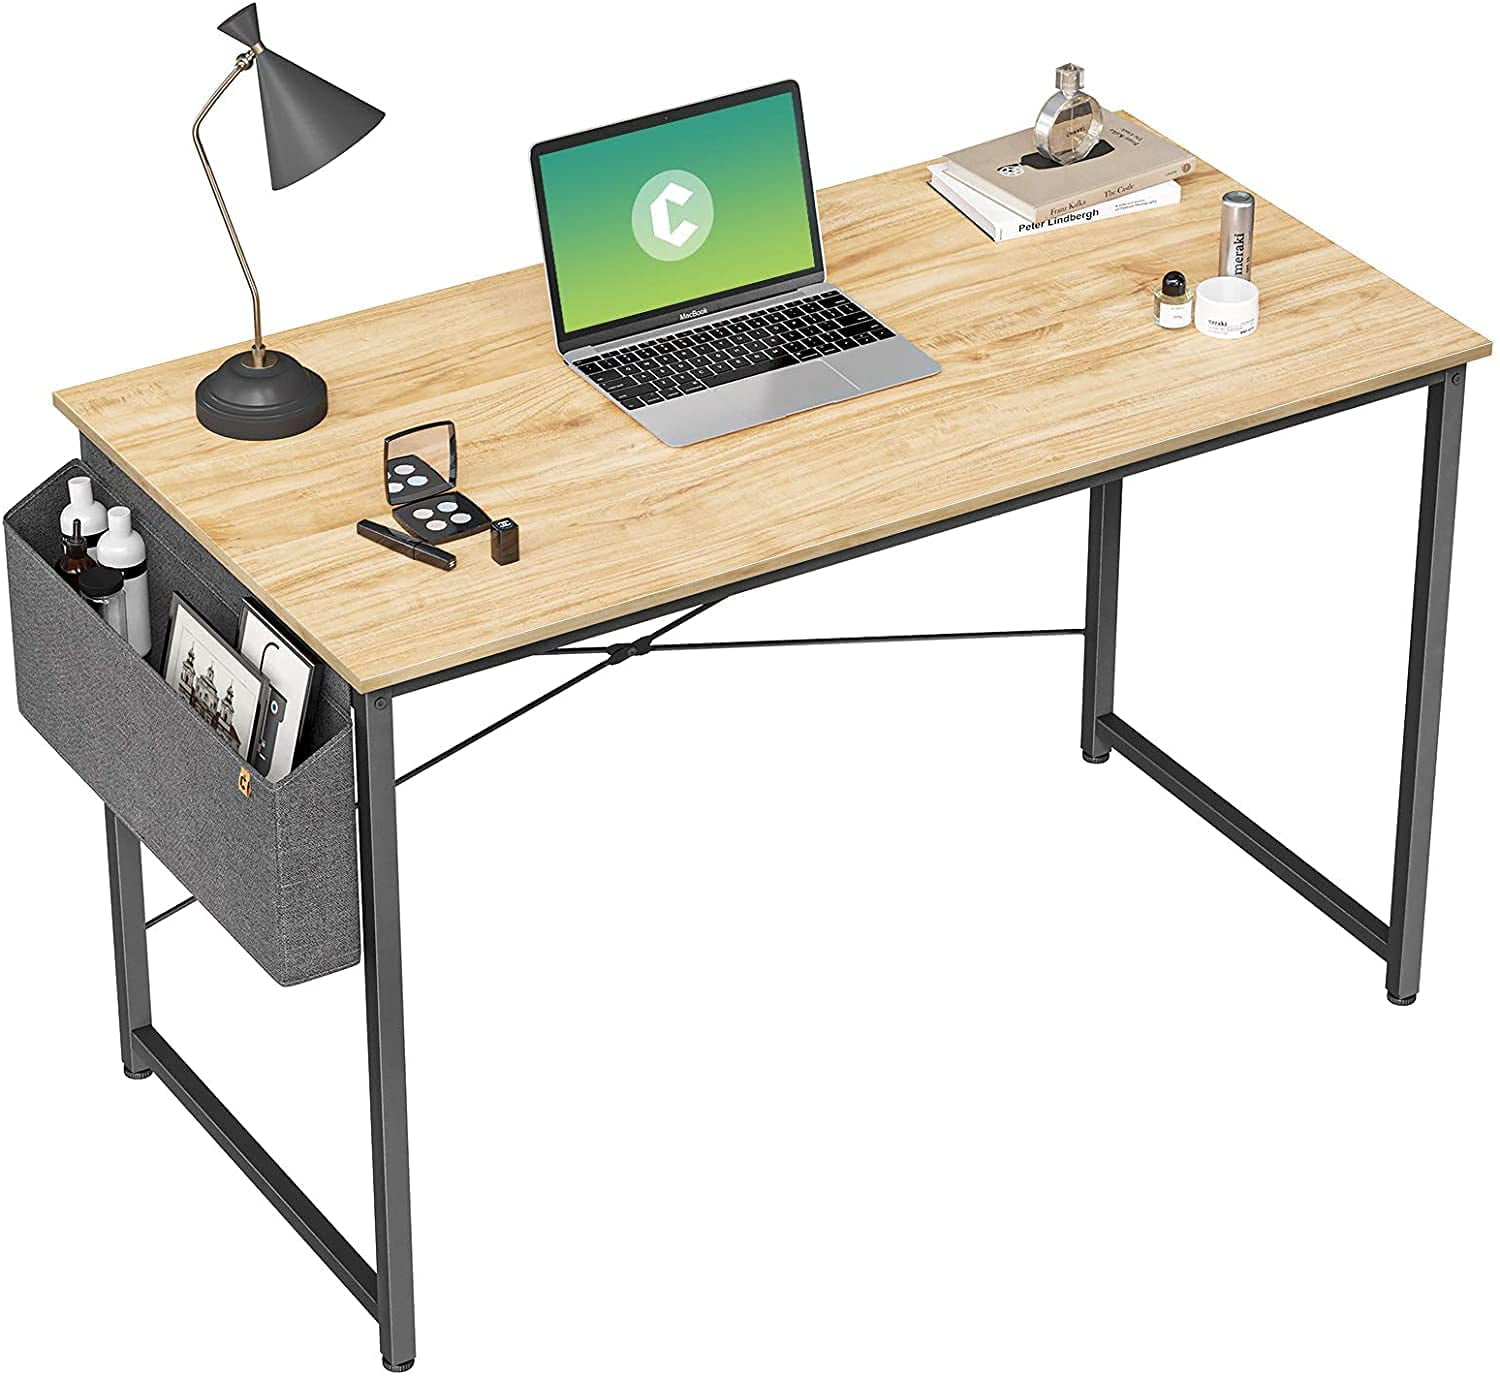 Cubiker Computer Desk 32 Home Office Writing Study Desk Modern Simple Style Laptop Table with Storage Bag Espresso